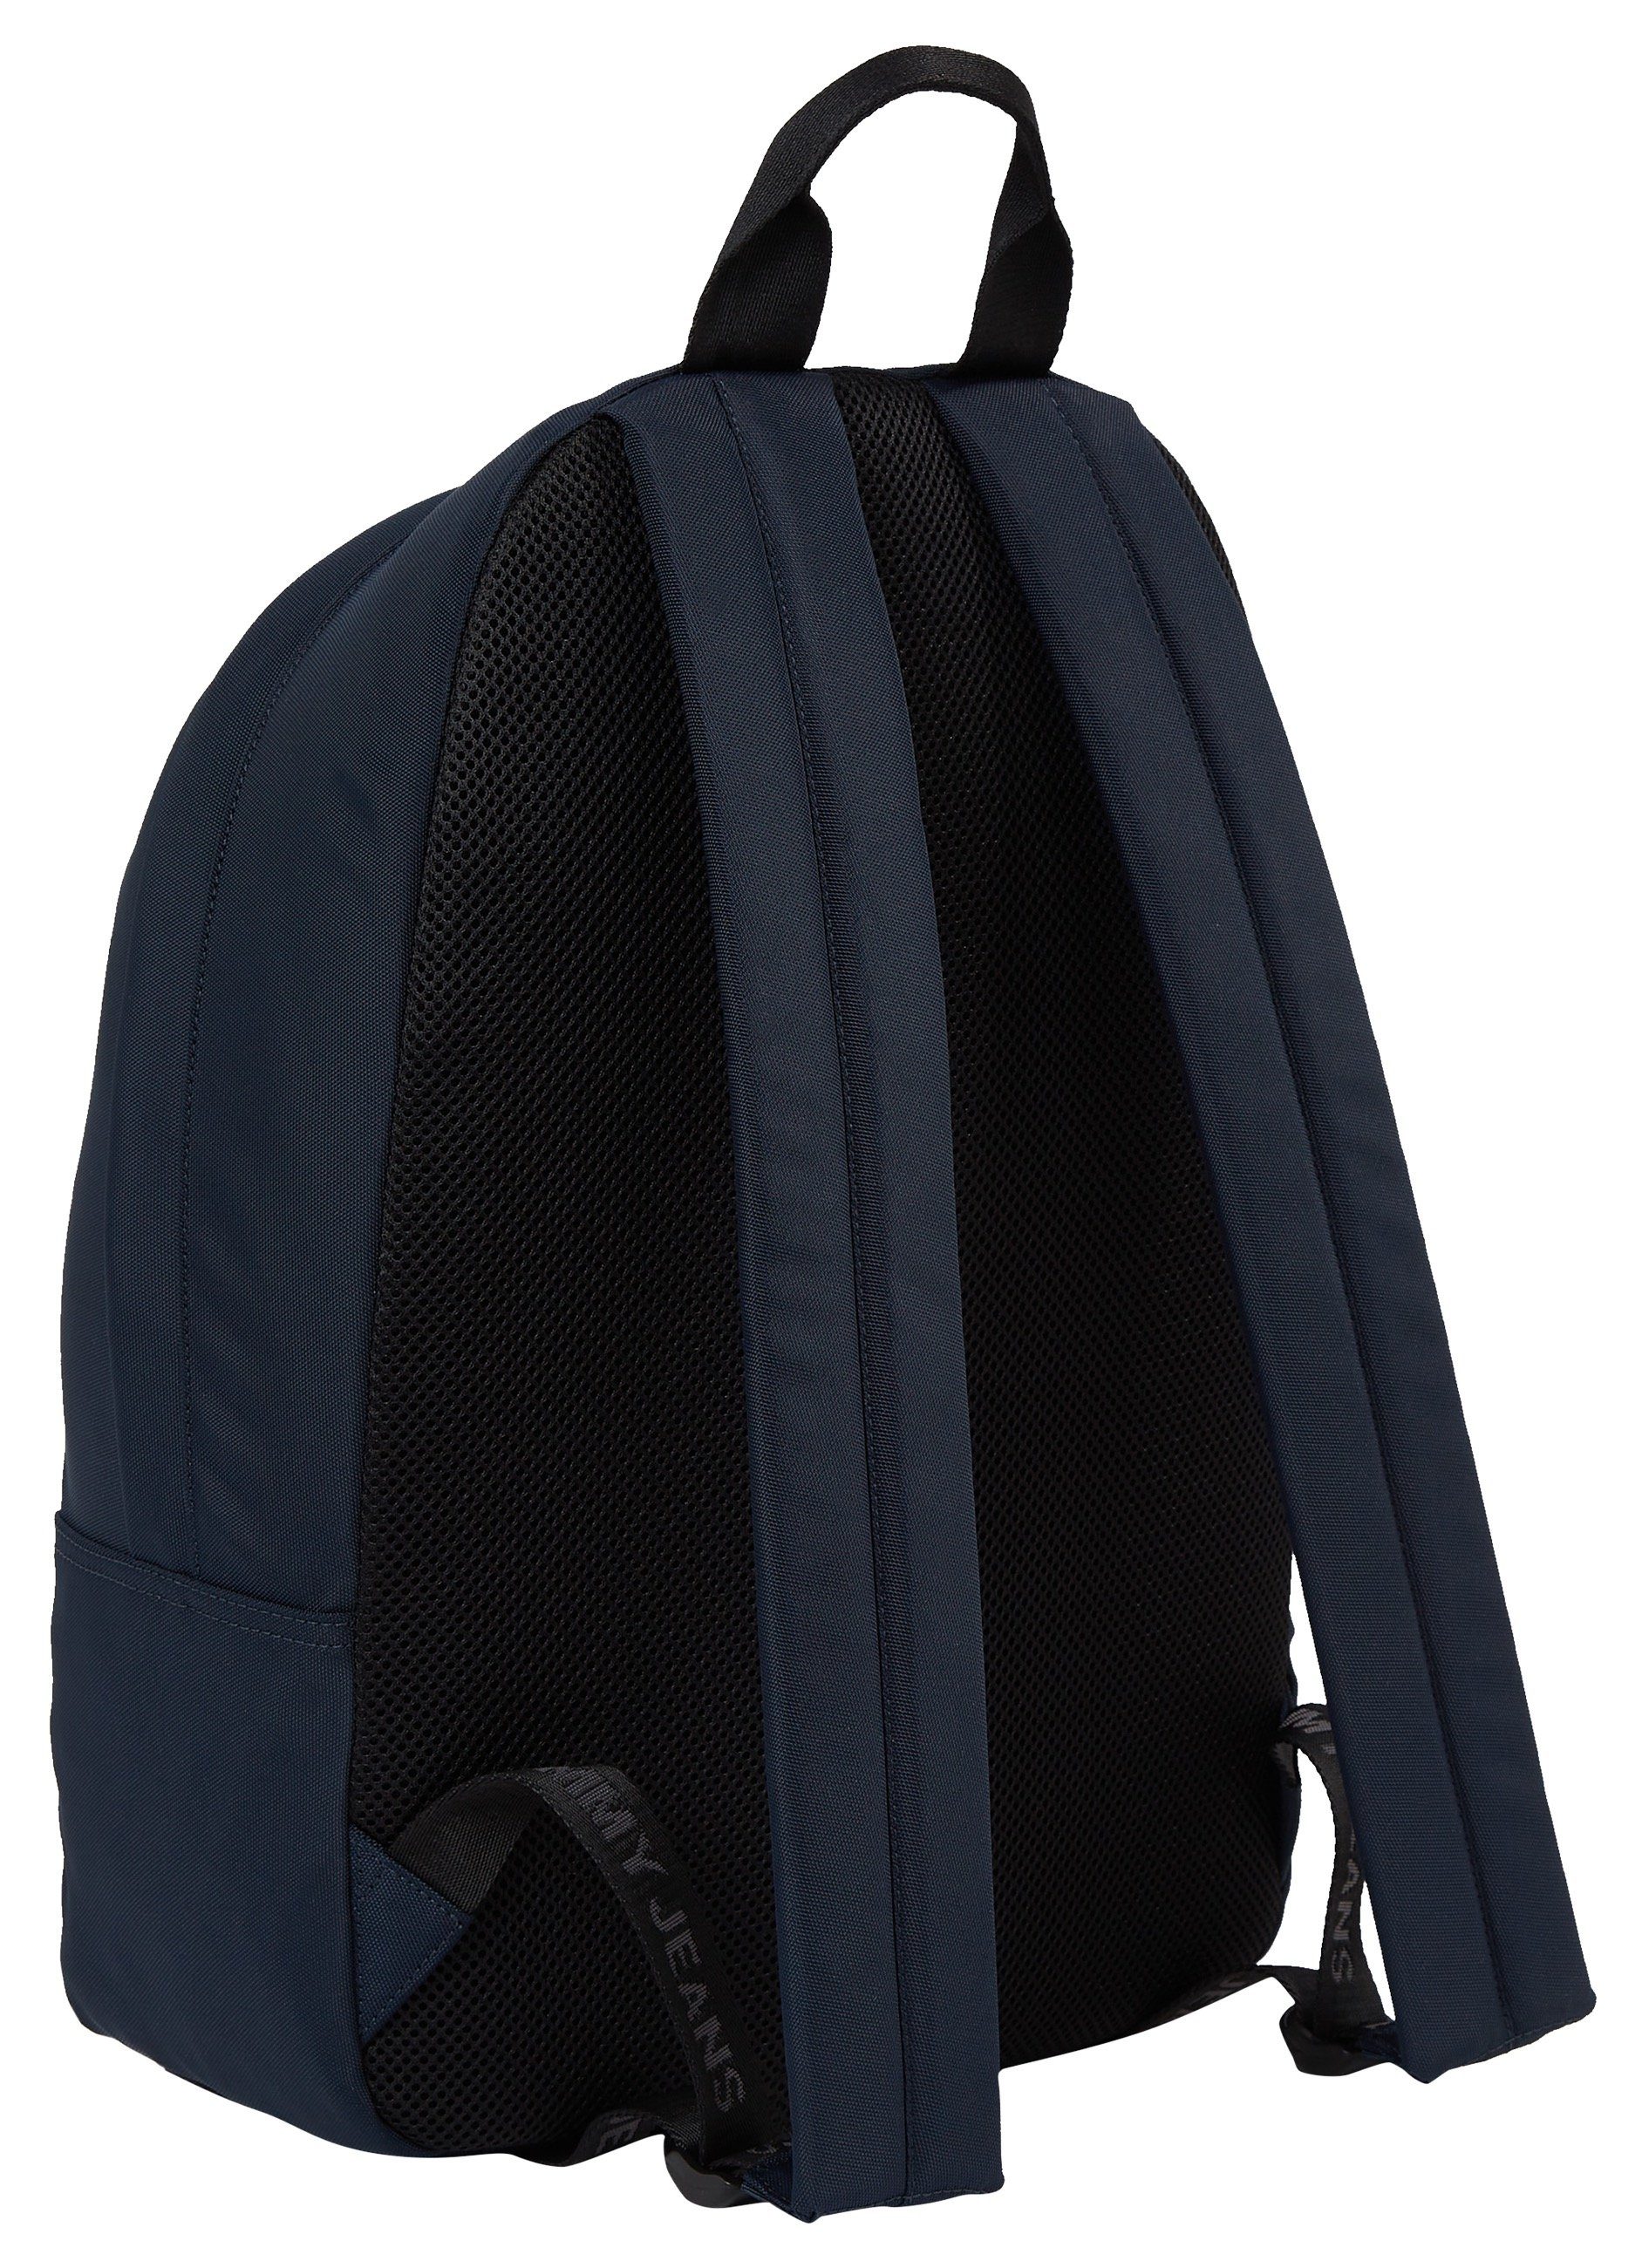 TOMMY JEANS Rugzak TJM DAILY DOME BACKPACK